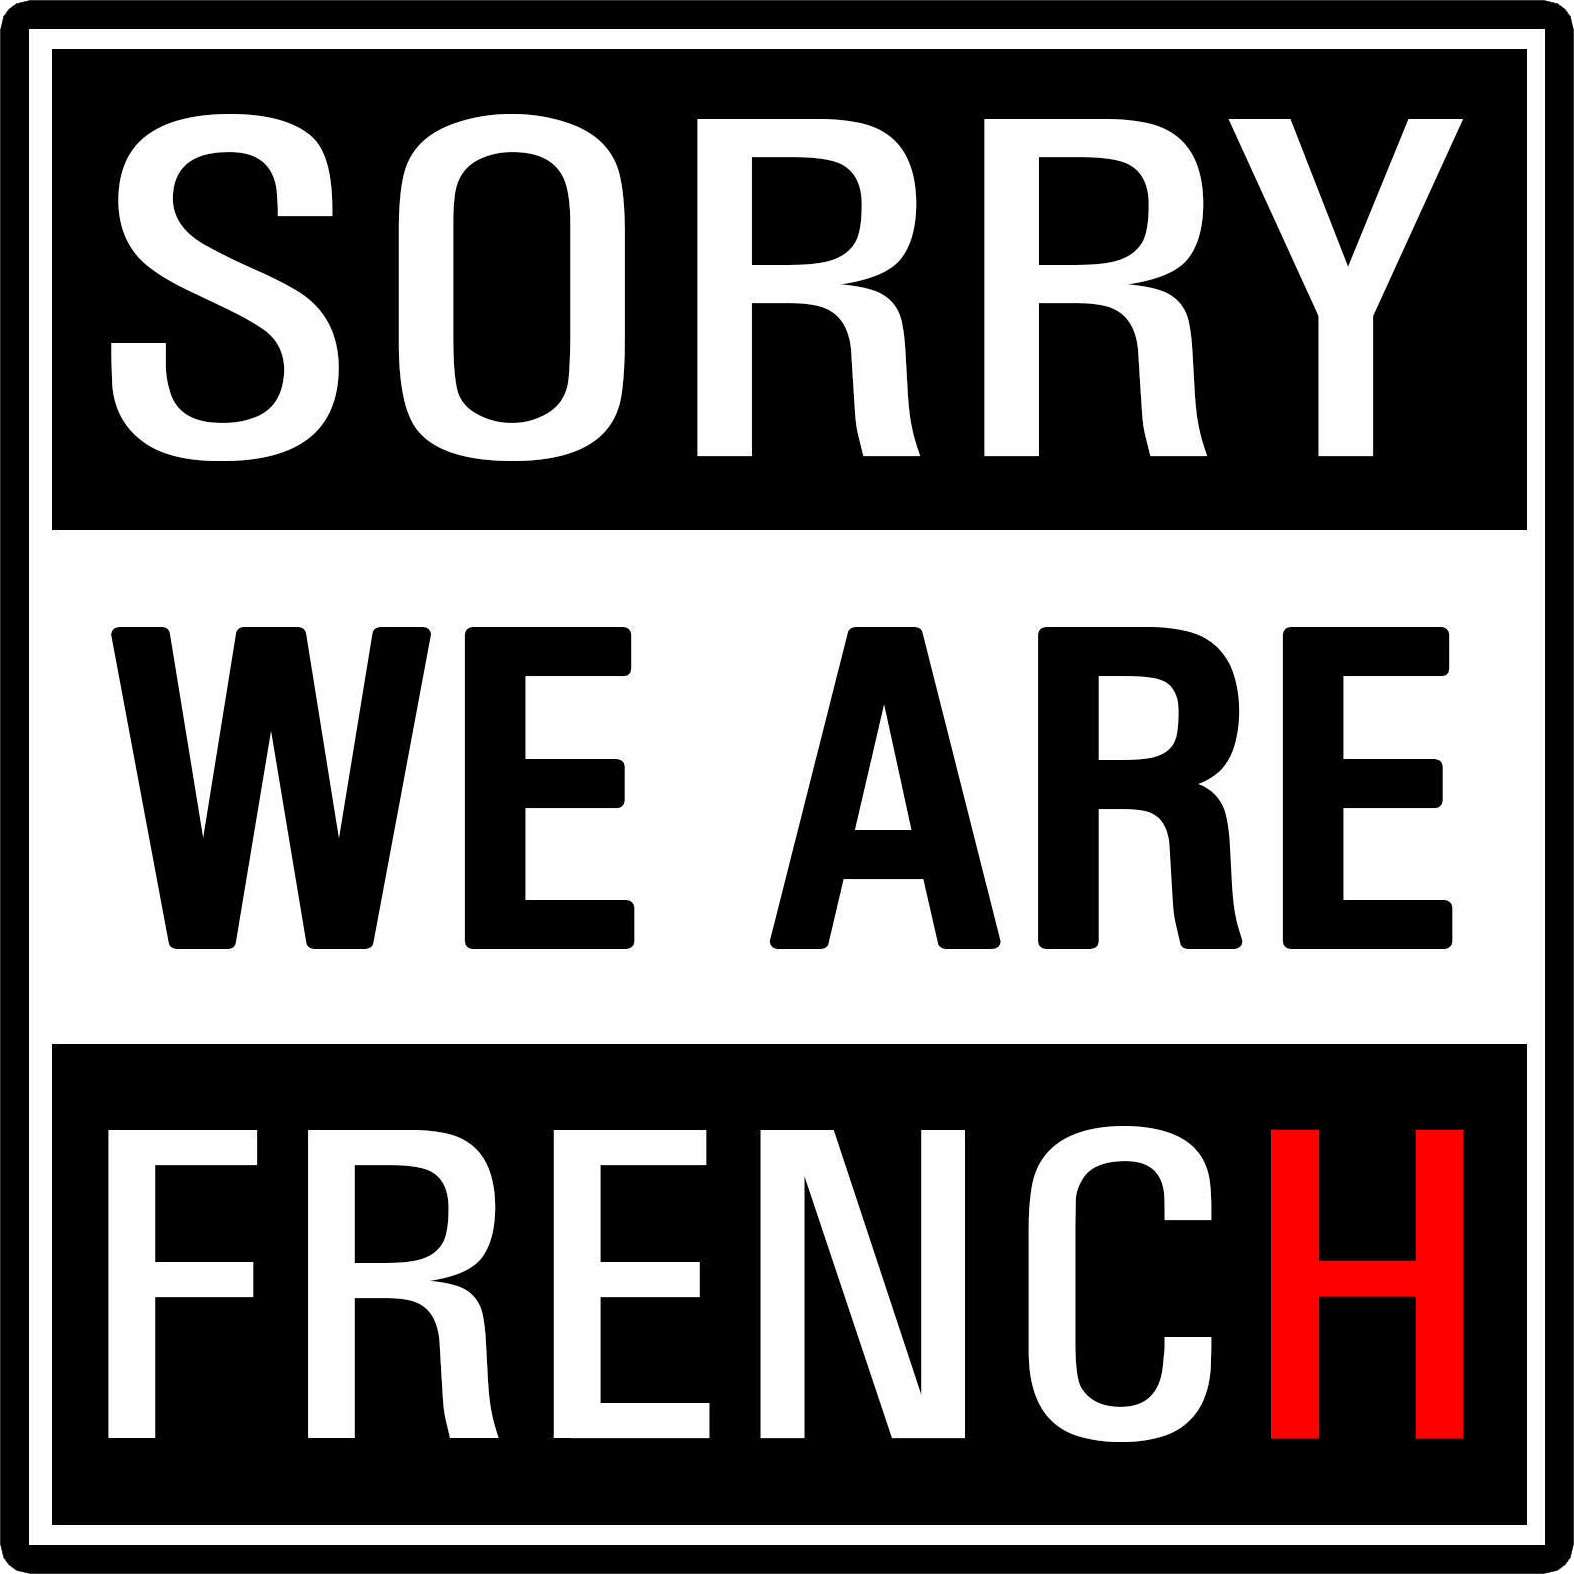 Sorrywearefrench